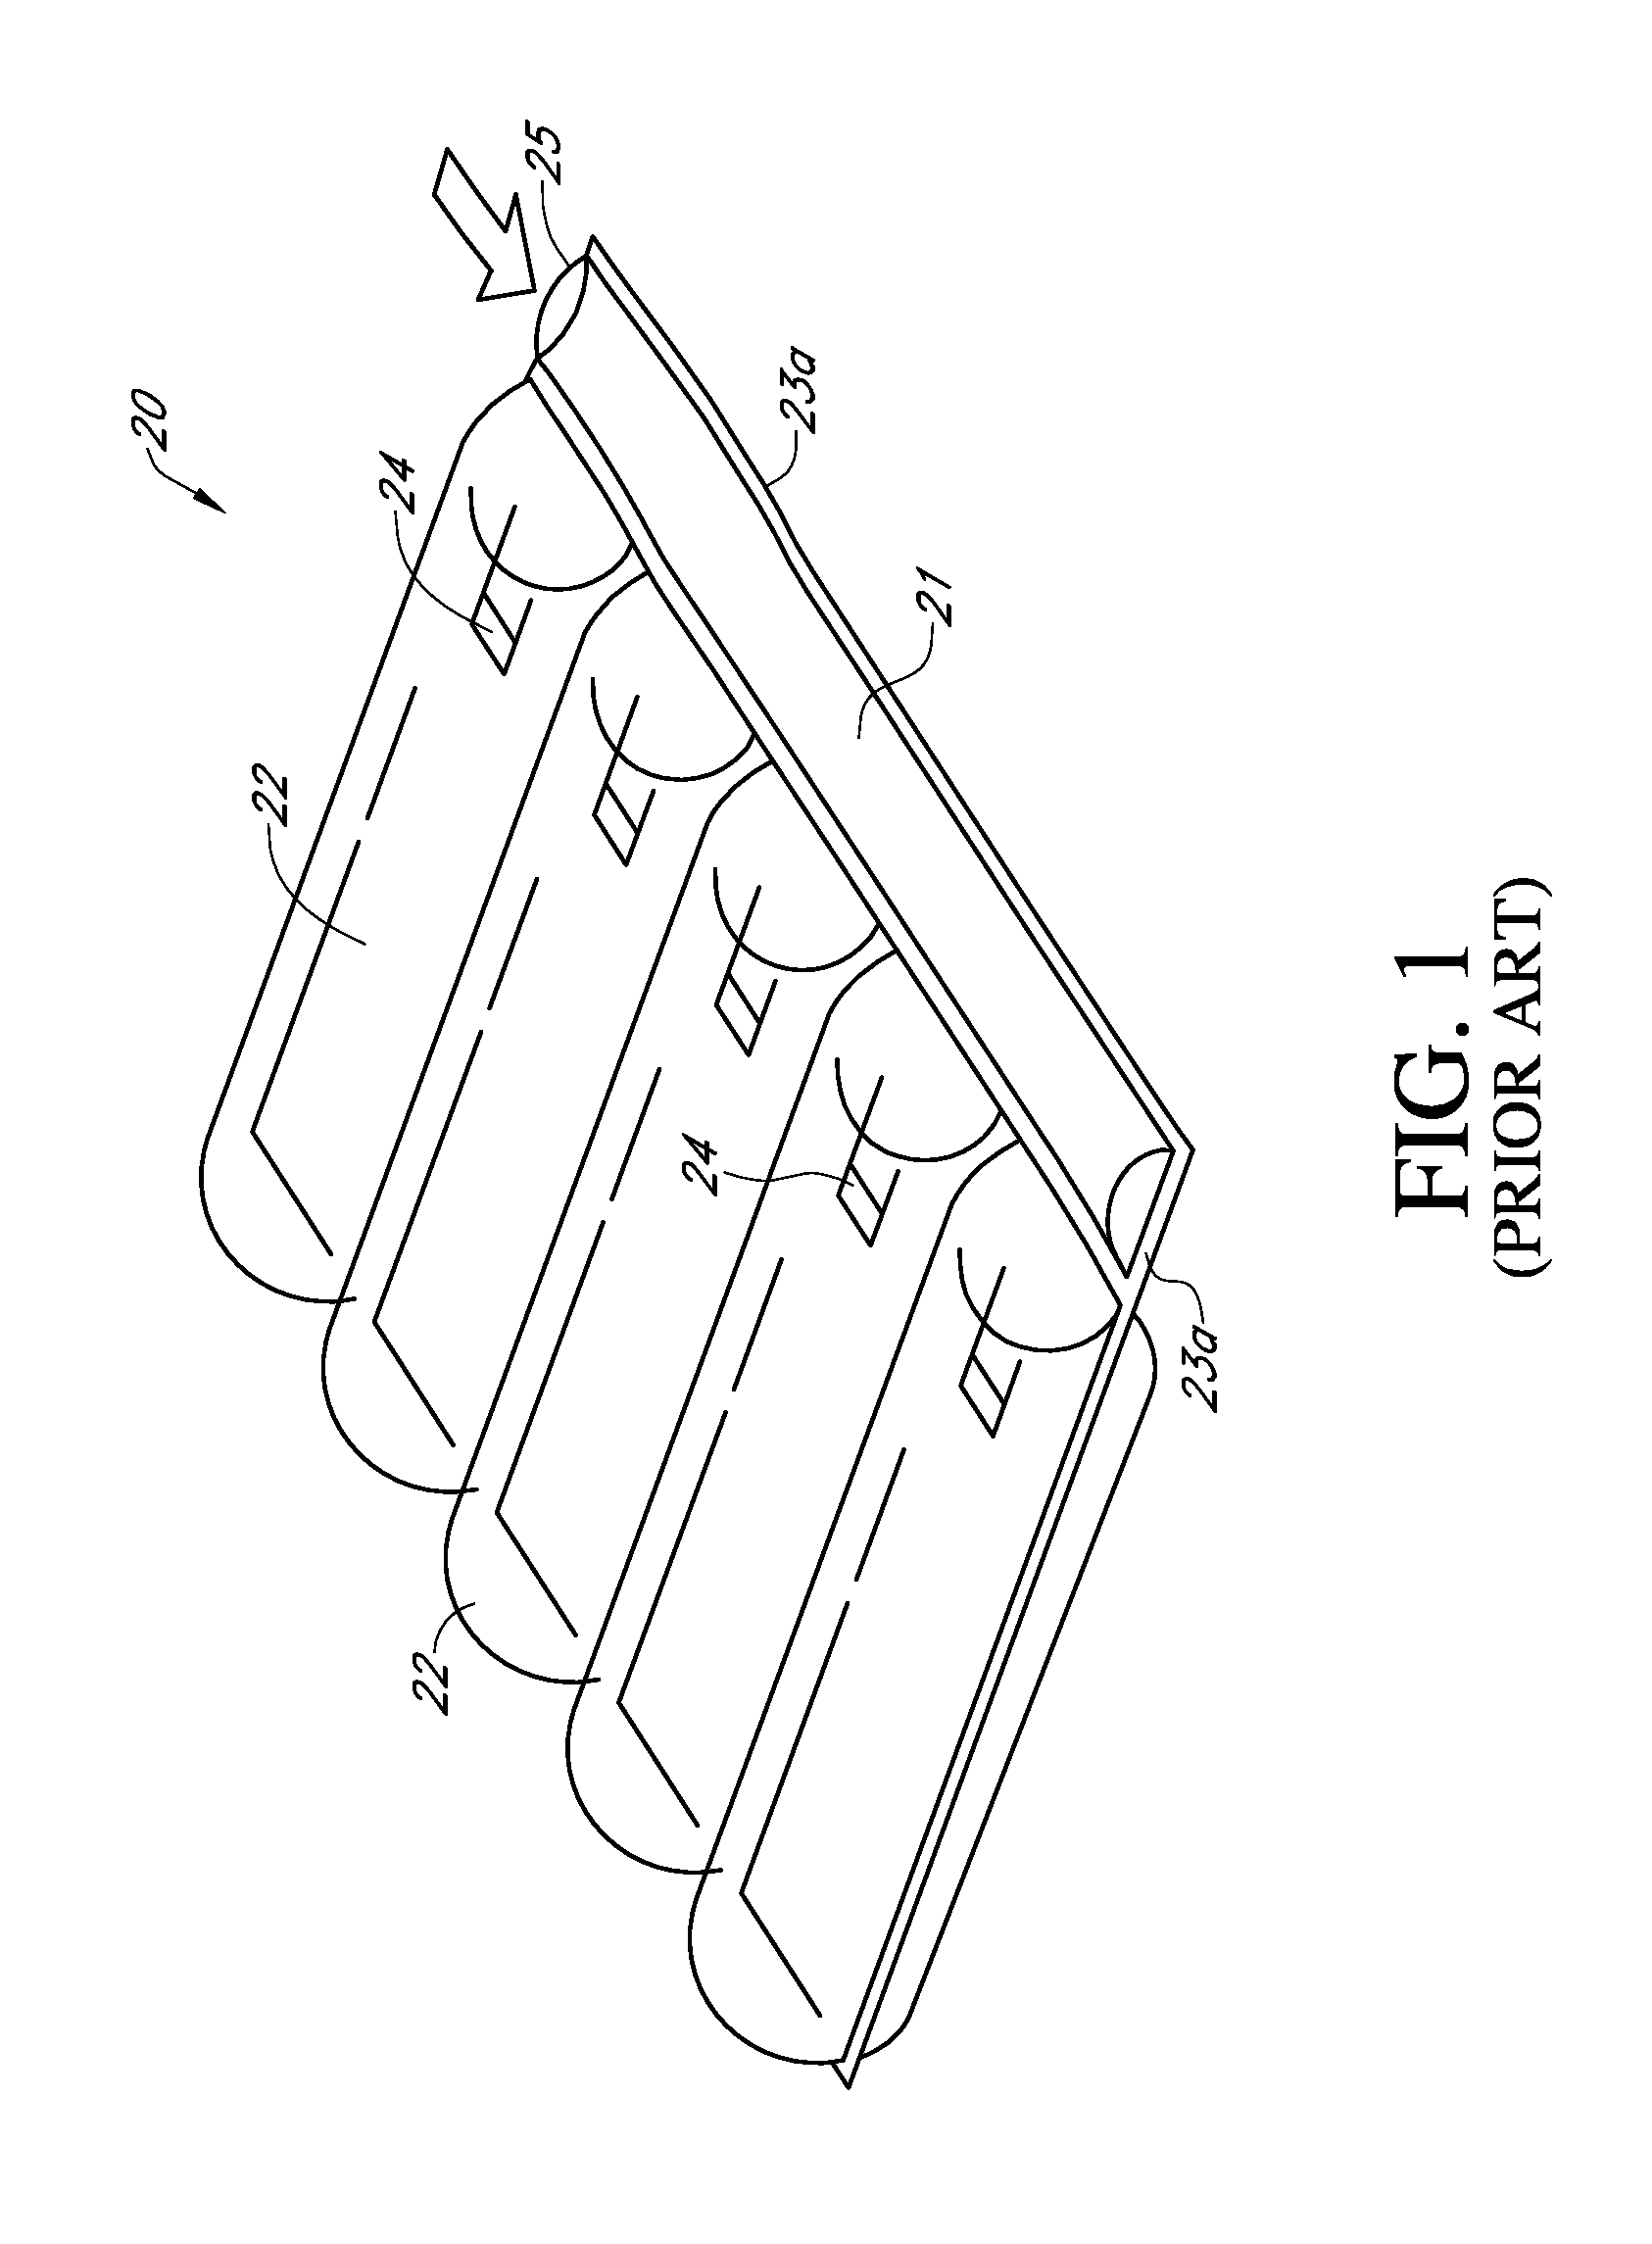 Structure of inflatable packaging device